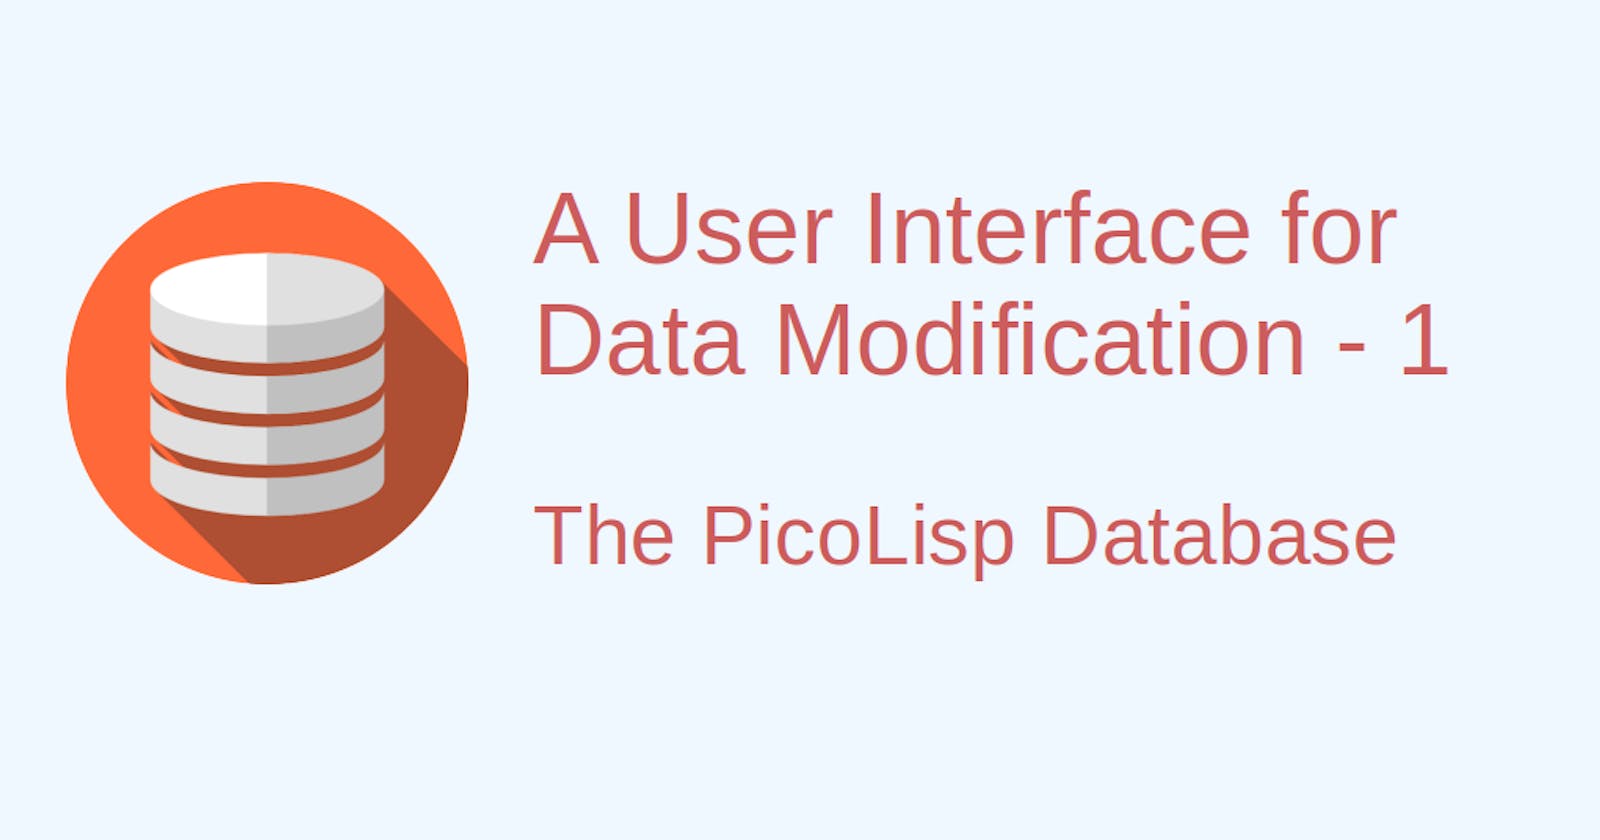 Creating a User Interface for Data Modification, Part 1